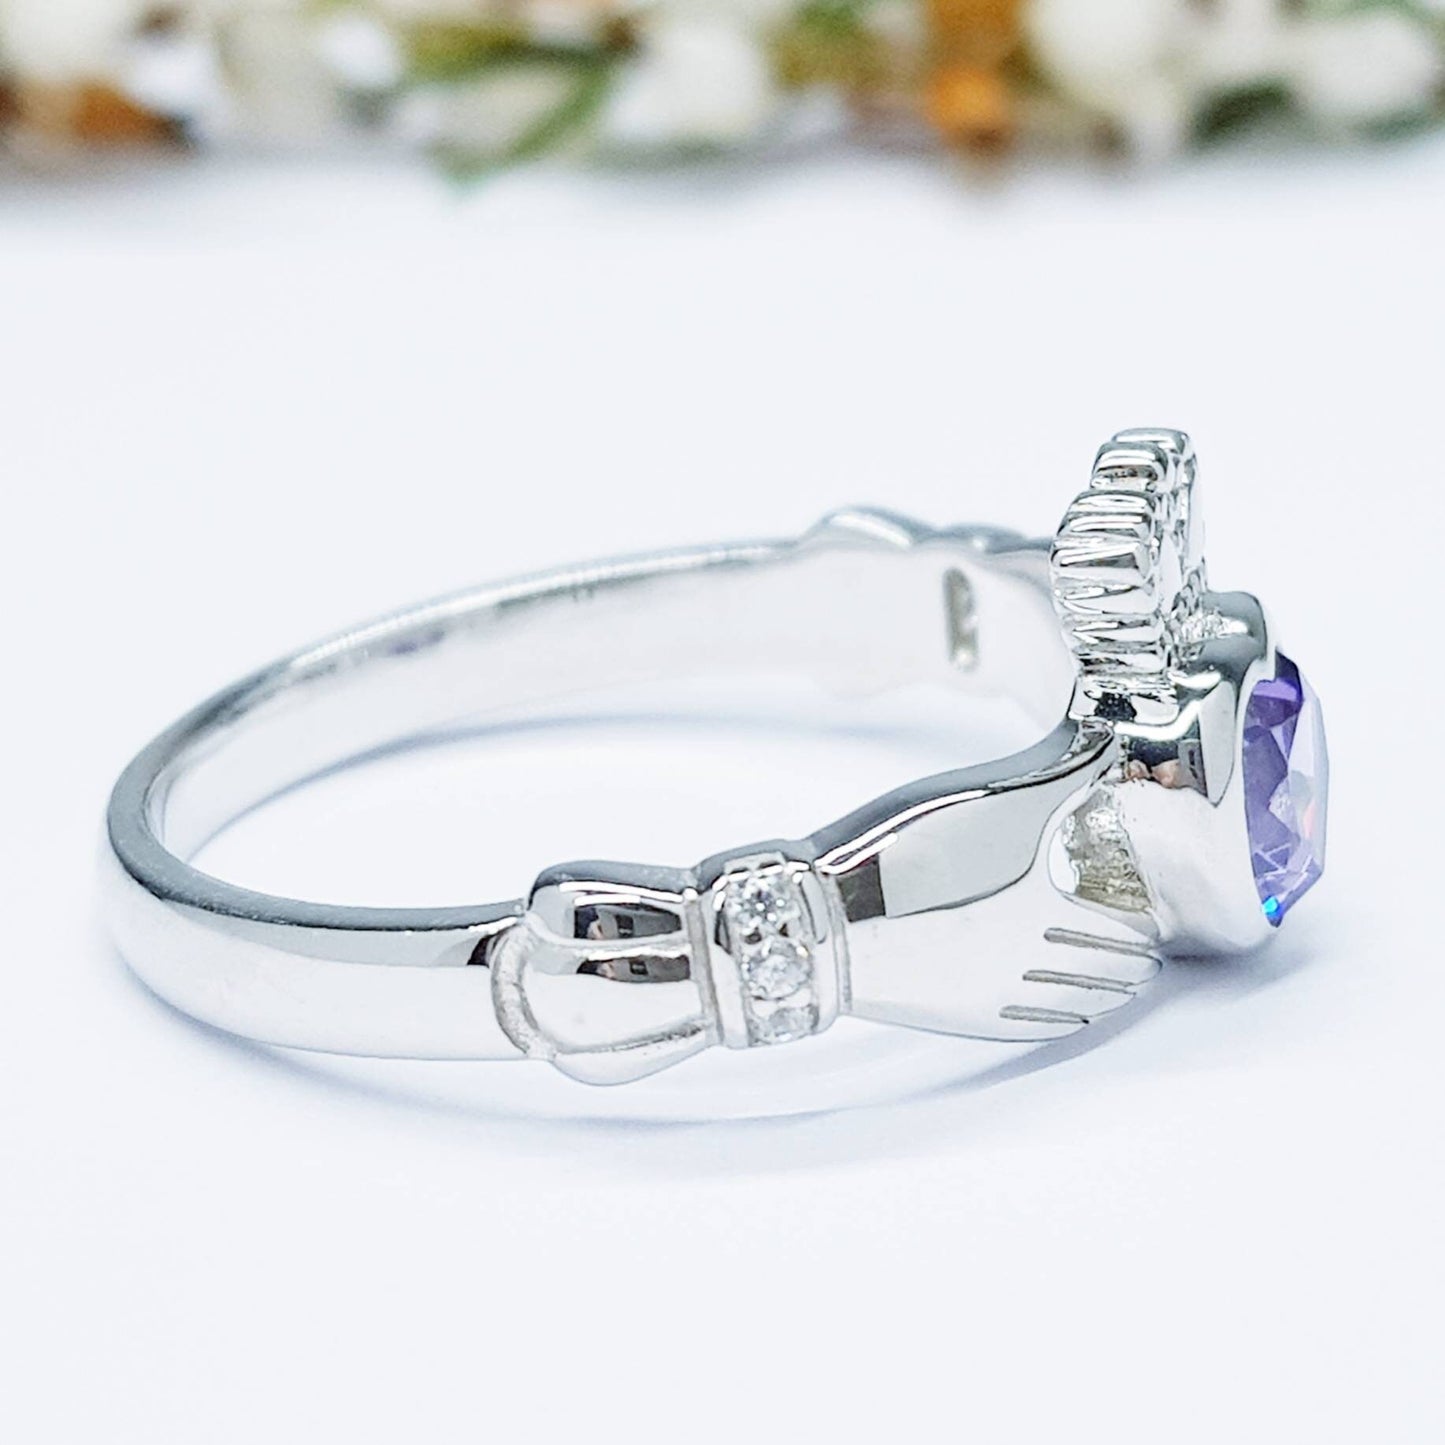 Sterling Silver Claddagh ring set with purple heart shaped stone, february birthstone claddagh